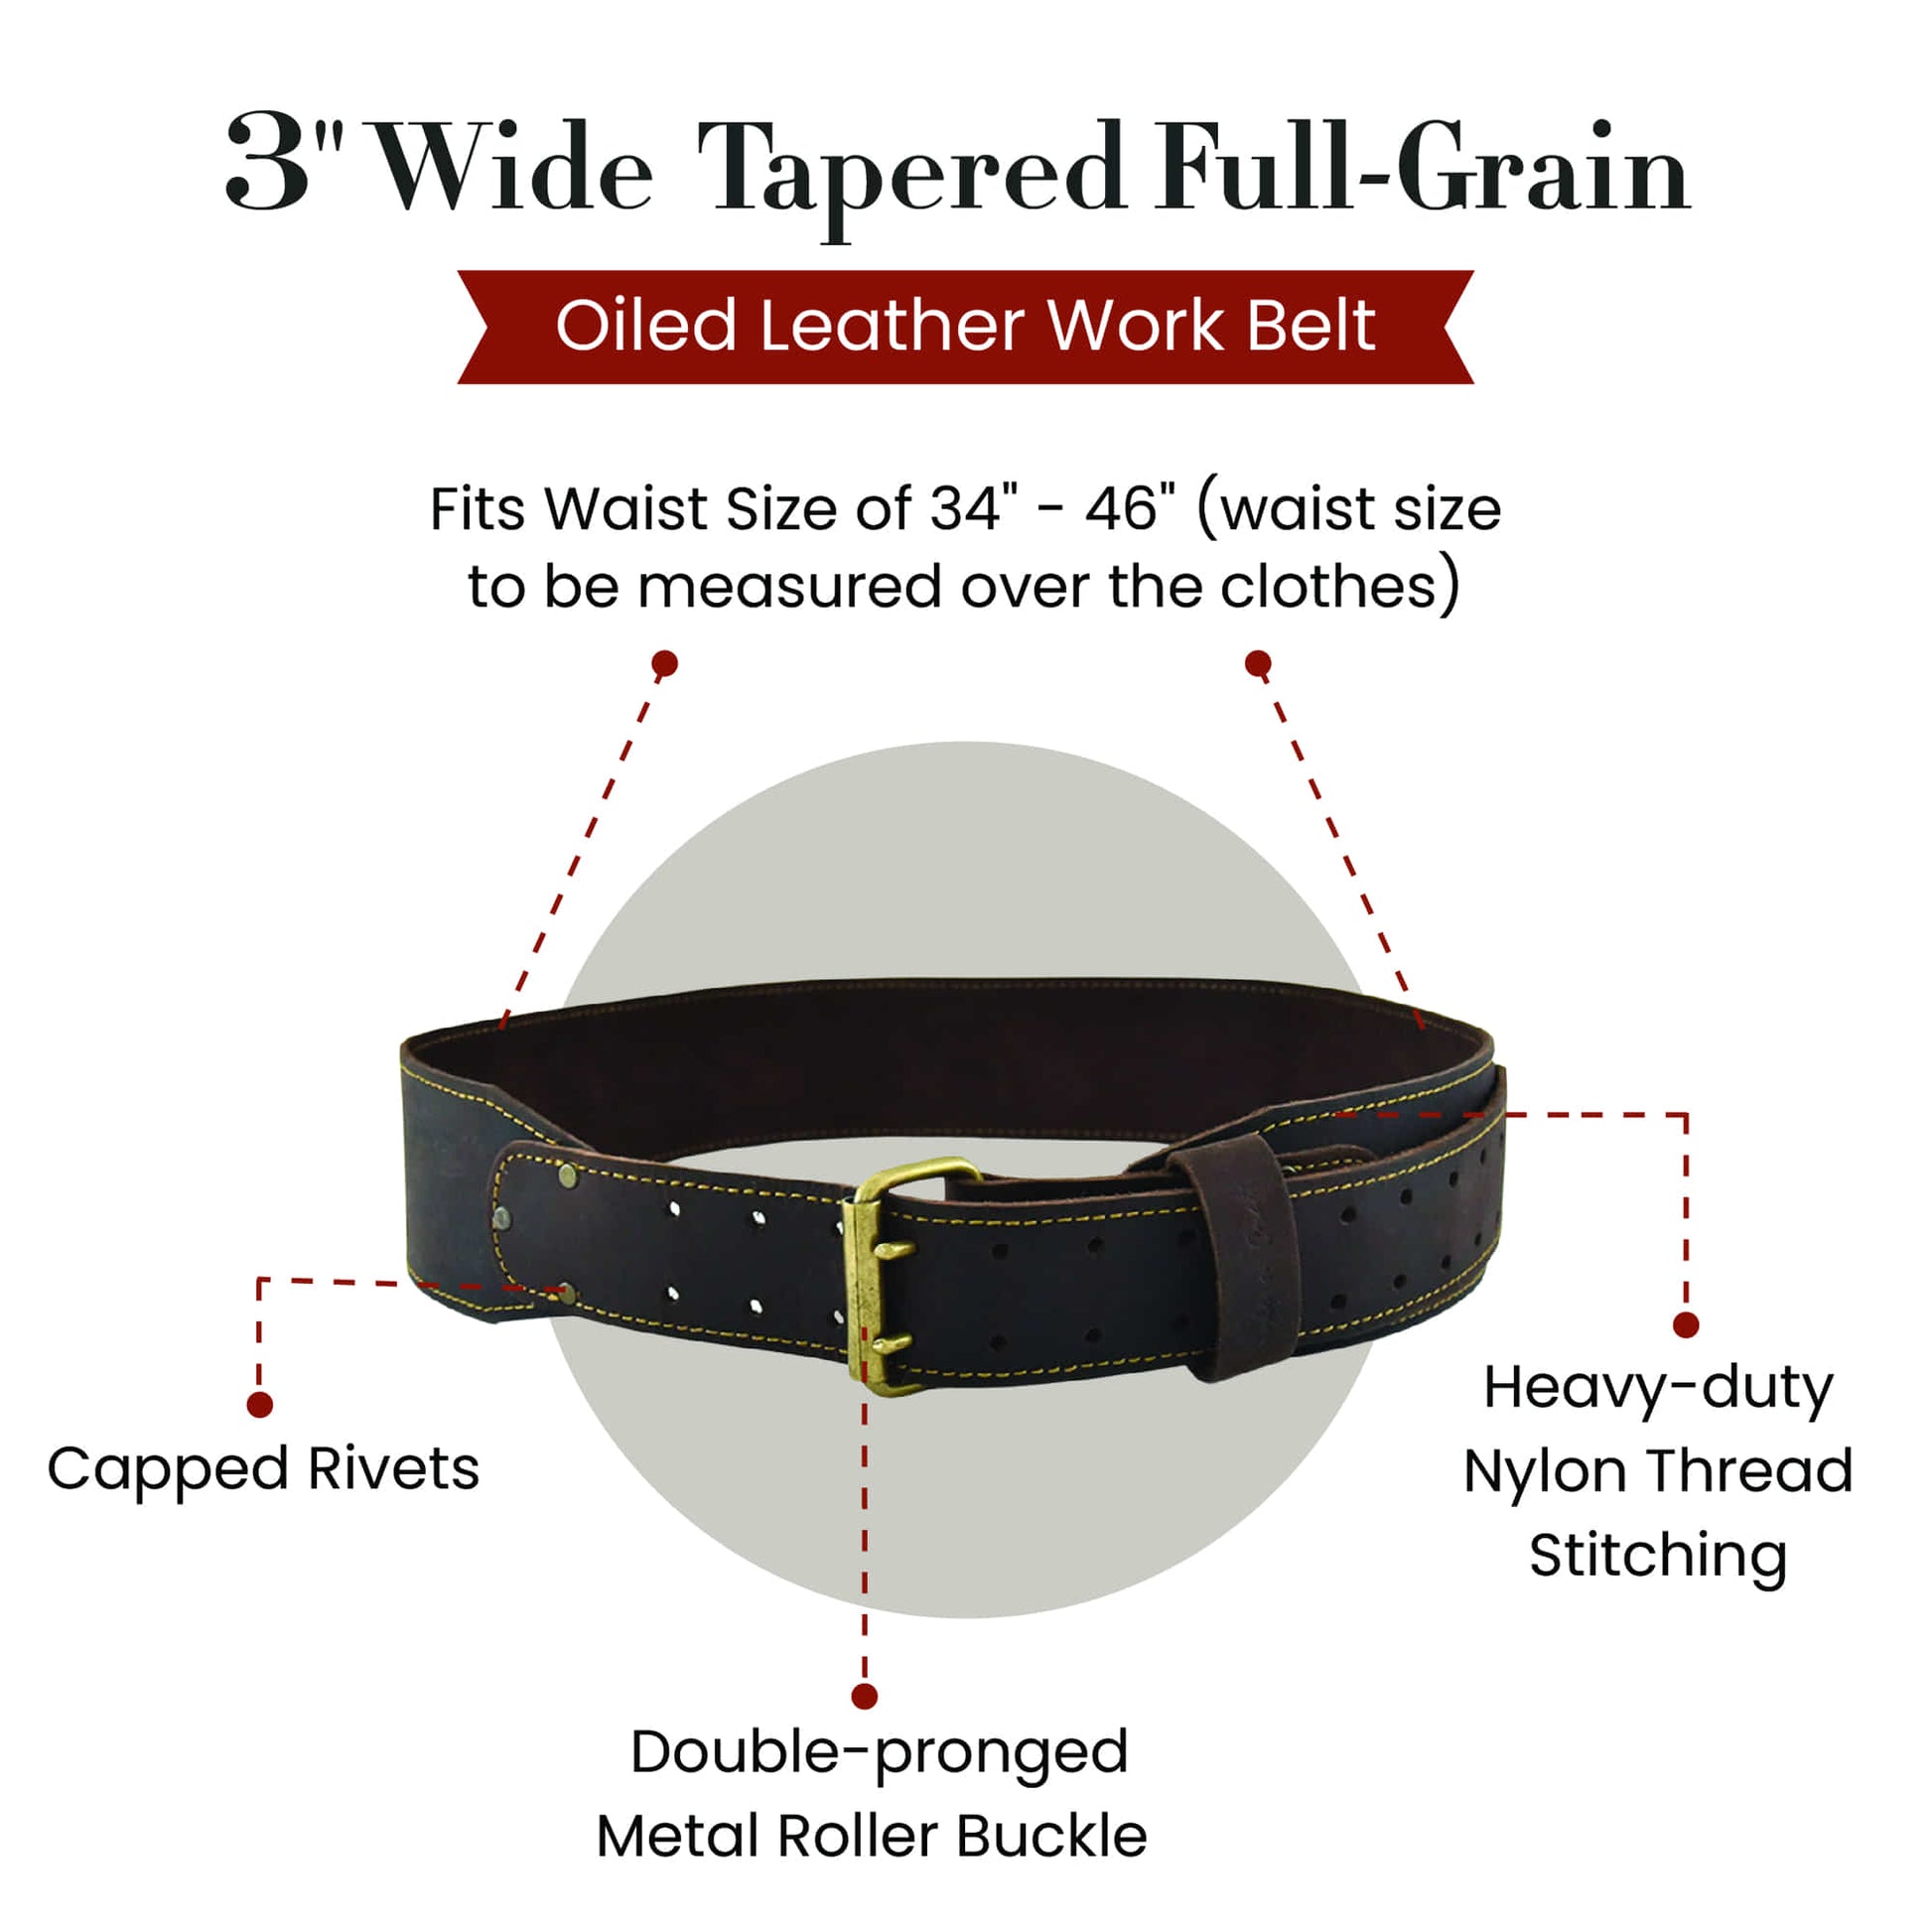 Style n Craft 74054 -3 Inch Wide Tapered Work Belt in Oiled Full Grain Leather in Dark Brown Color - Front View Showing the Details